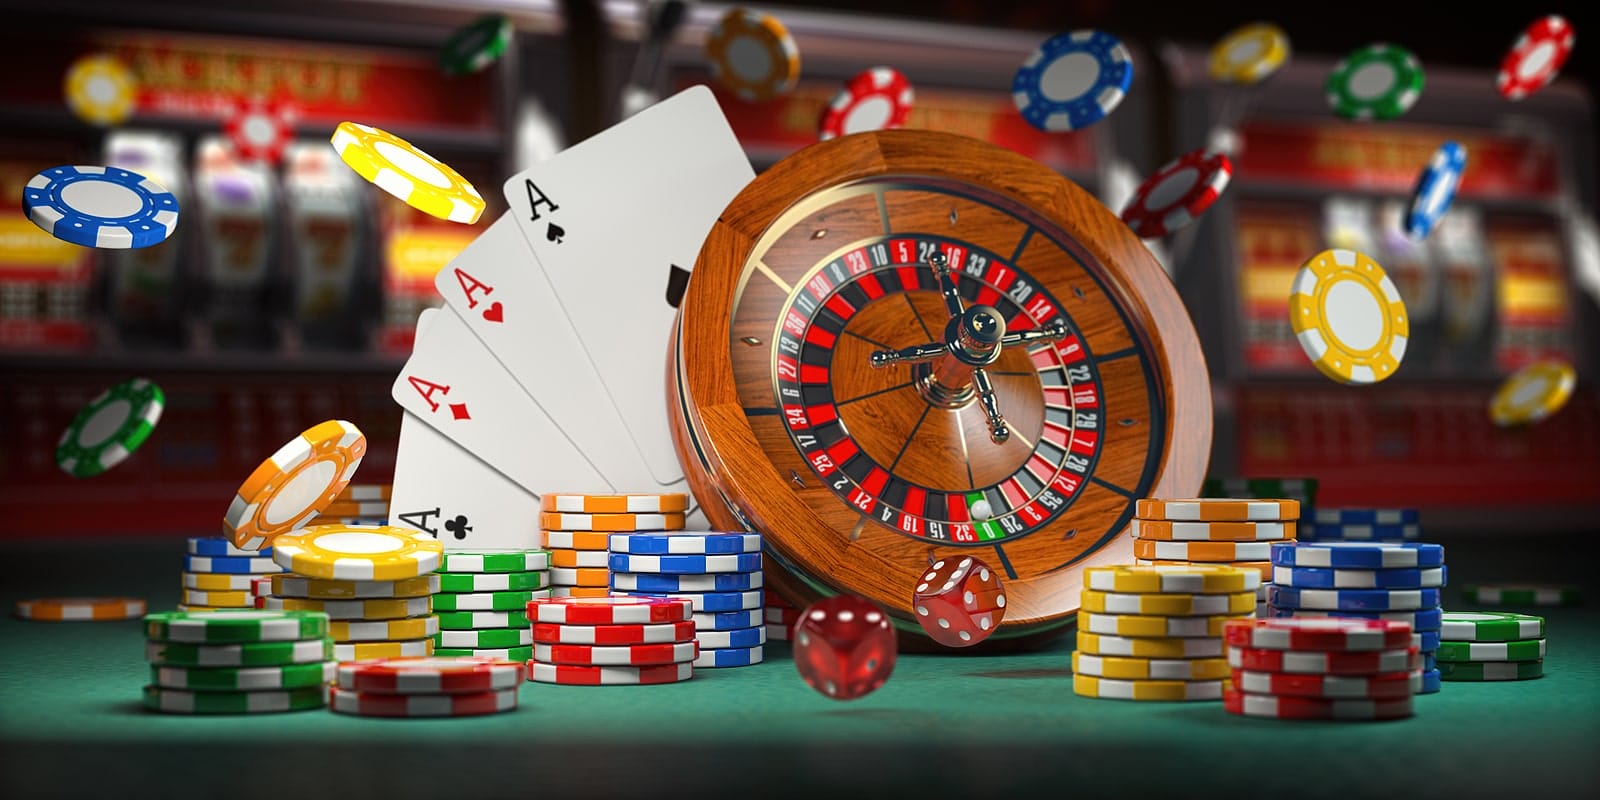 Top 5 popular online casino games you can try right now!